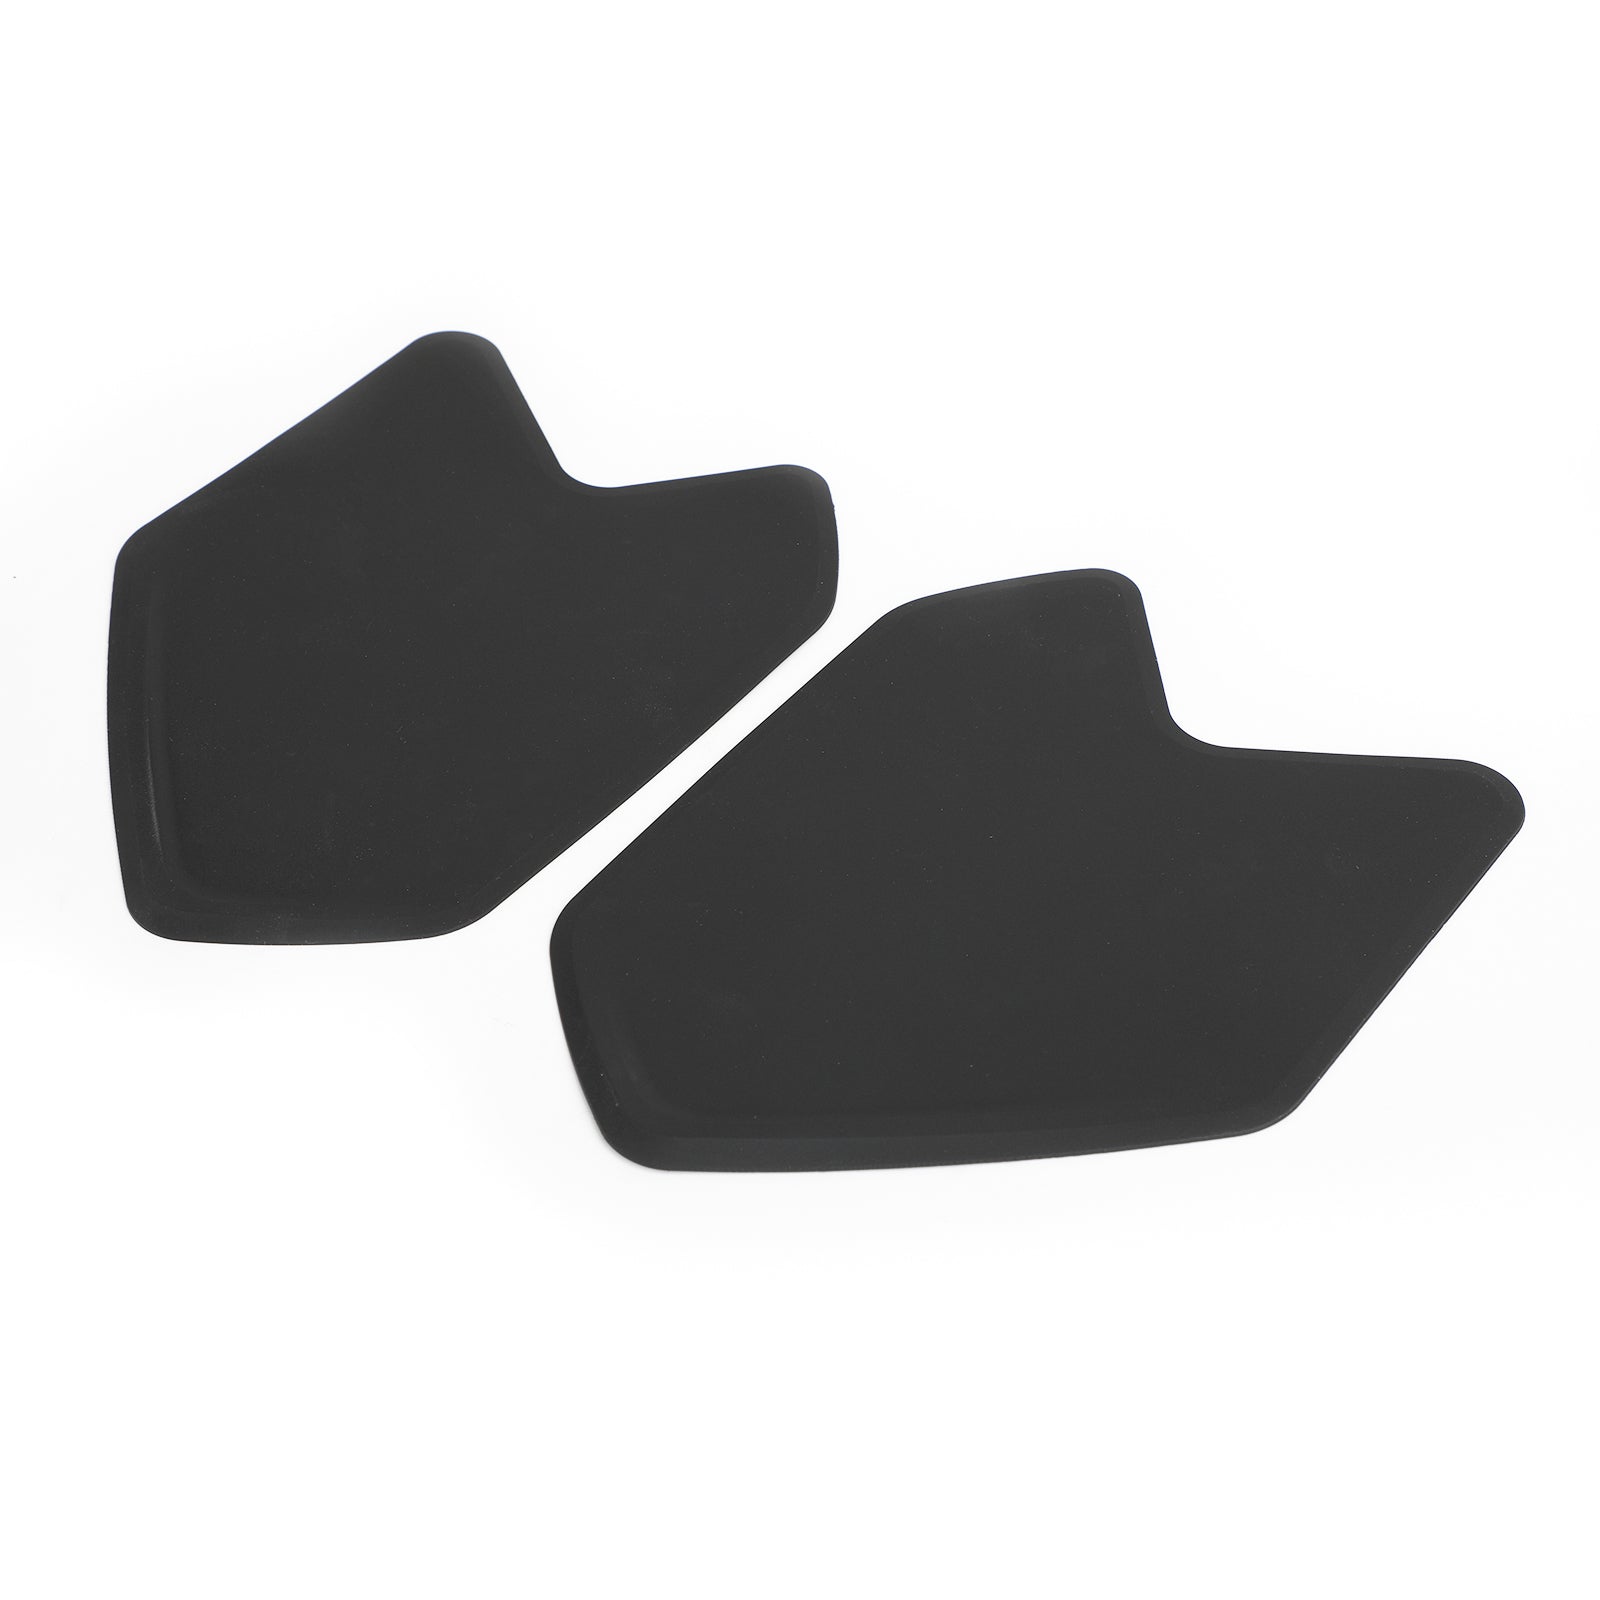 BMW R1200GS LC Adv 2008-2017 Side Tank Traction Grips Pads ProtectorVehicle Parts &amp; Accessories, Motorcycle Parts, Other Motorcycle Parts!